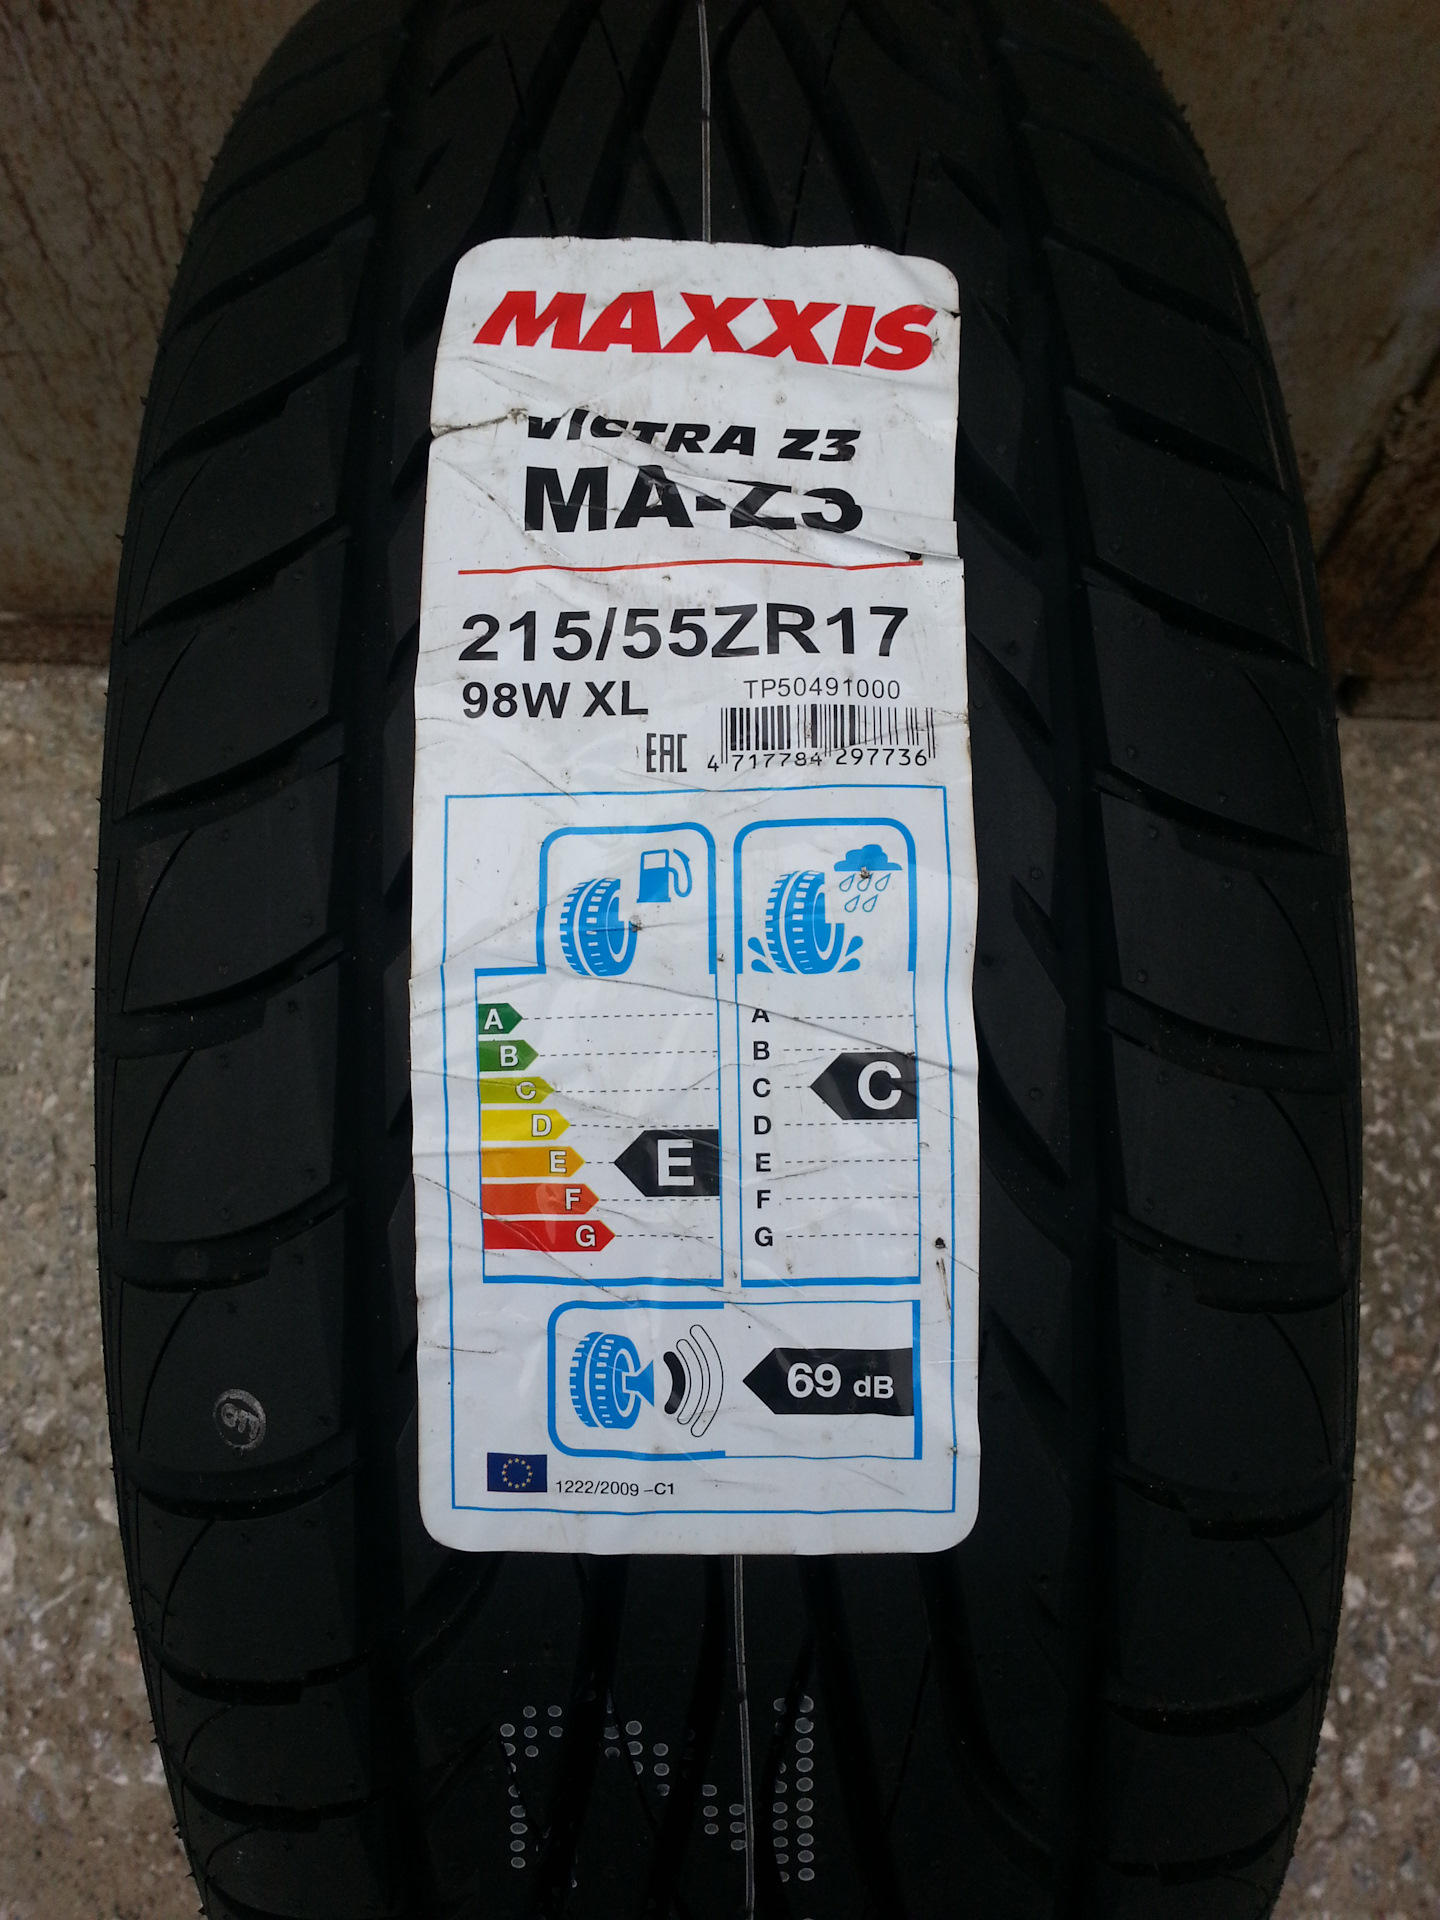 Maxxis отзывы лето. Шины Maxxis Victra ma-z3. Максис z3 евроэтикетка. Maxxis z3 215 55 17 евроэтикетка. Maxxis евроэтикетка.